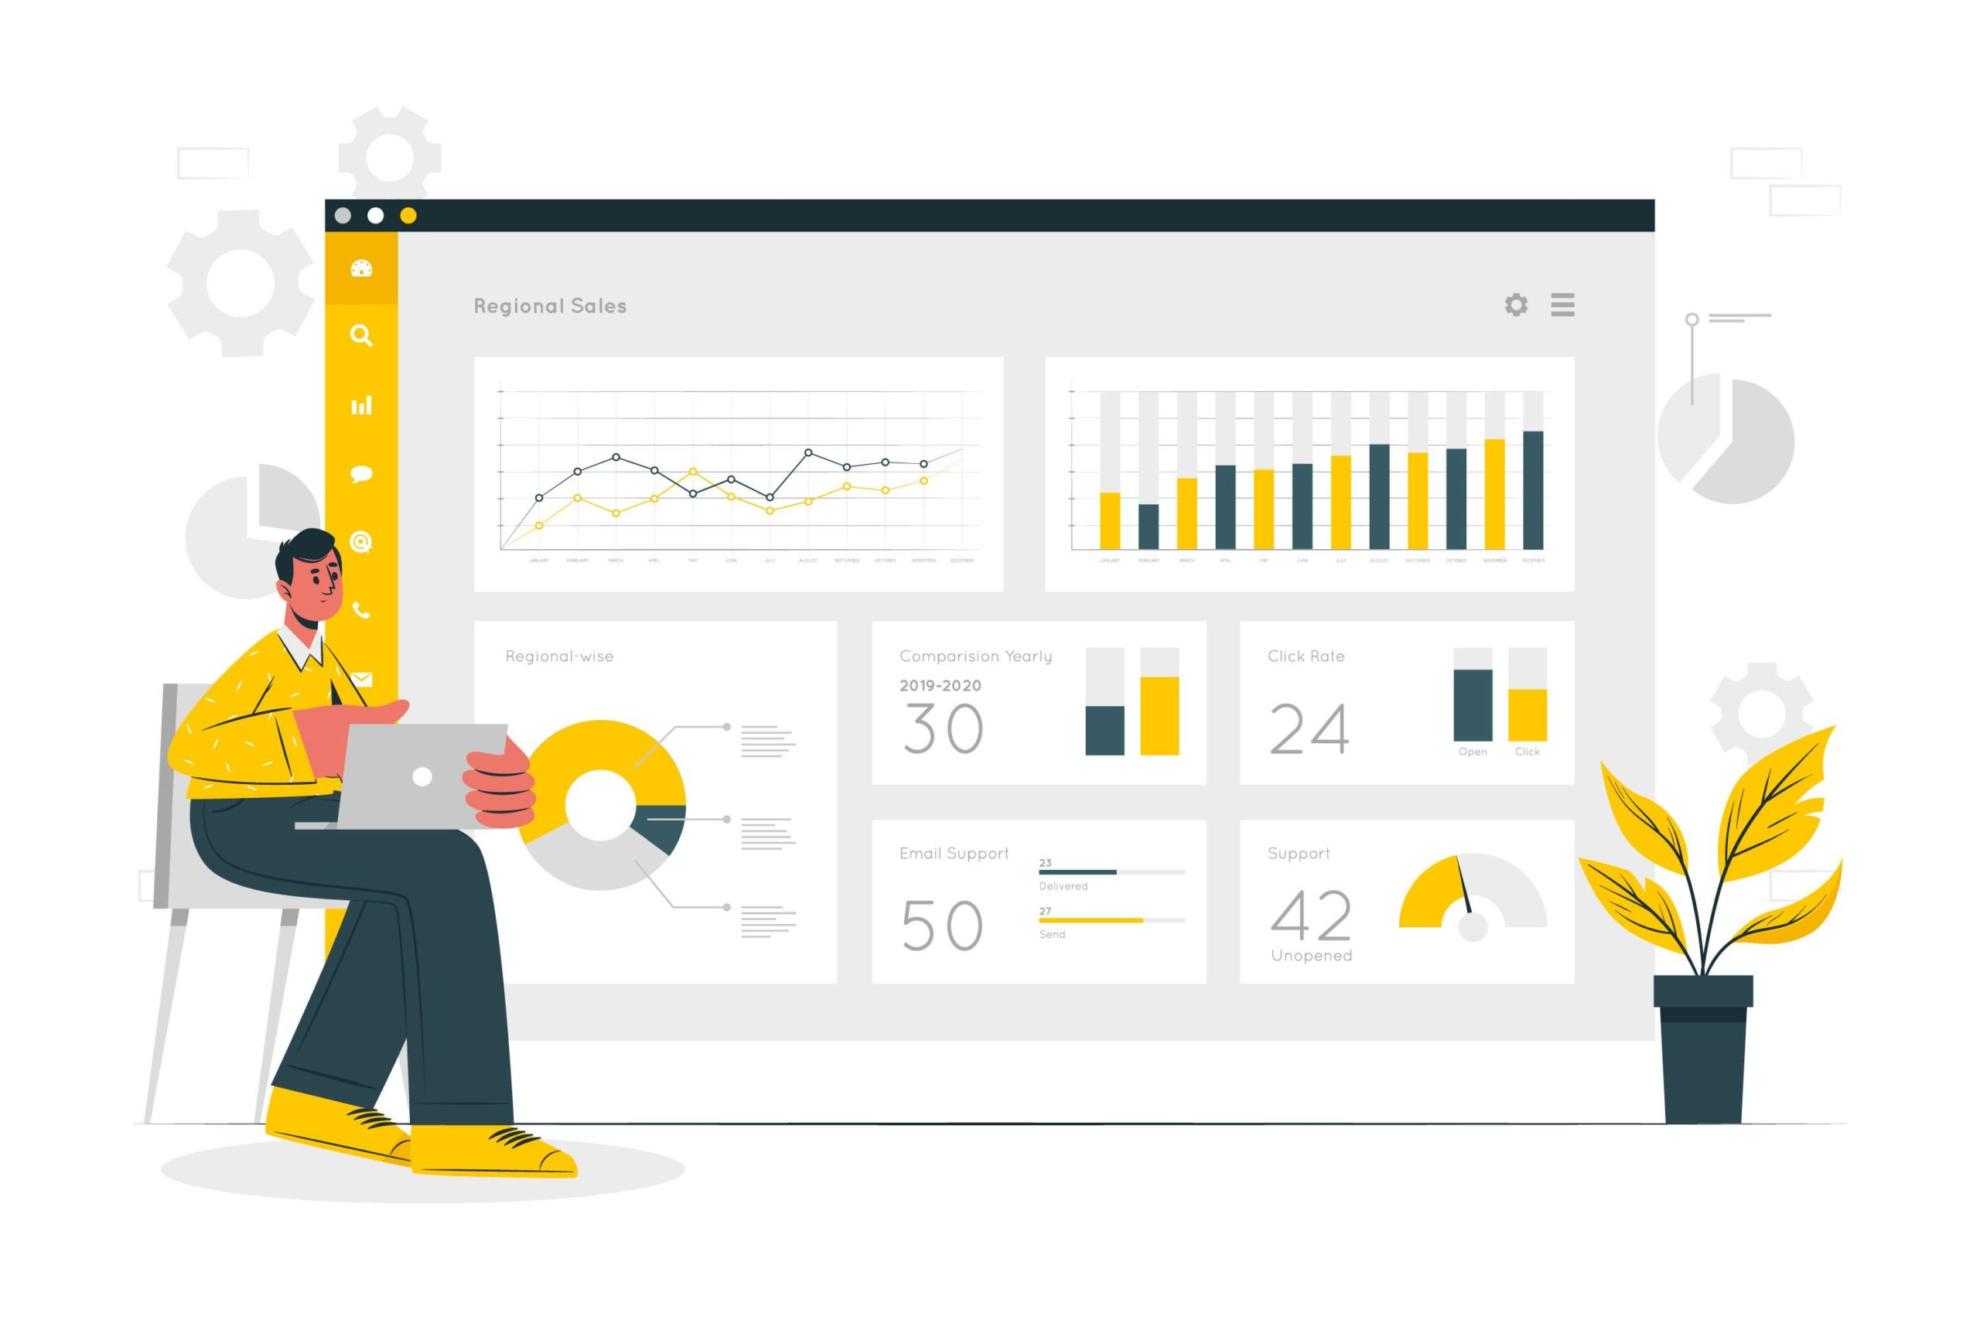 Complete Guide to using Power BI for Digital Marketing - Windsor.a